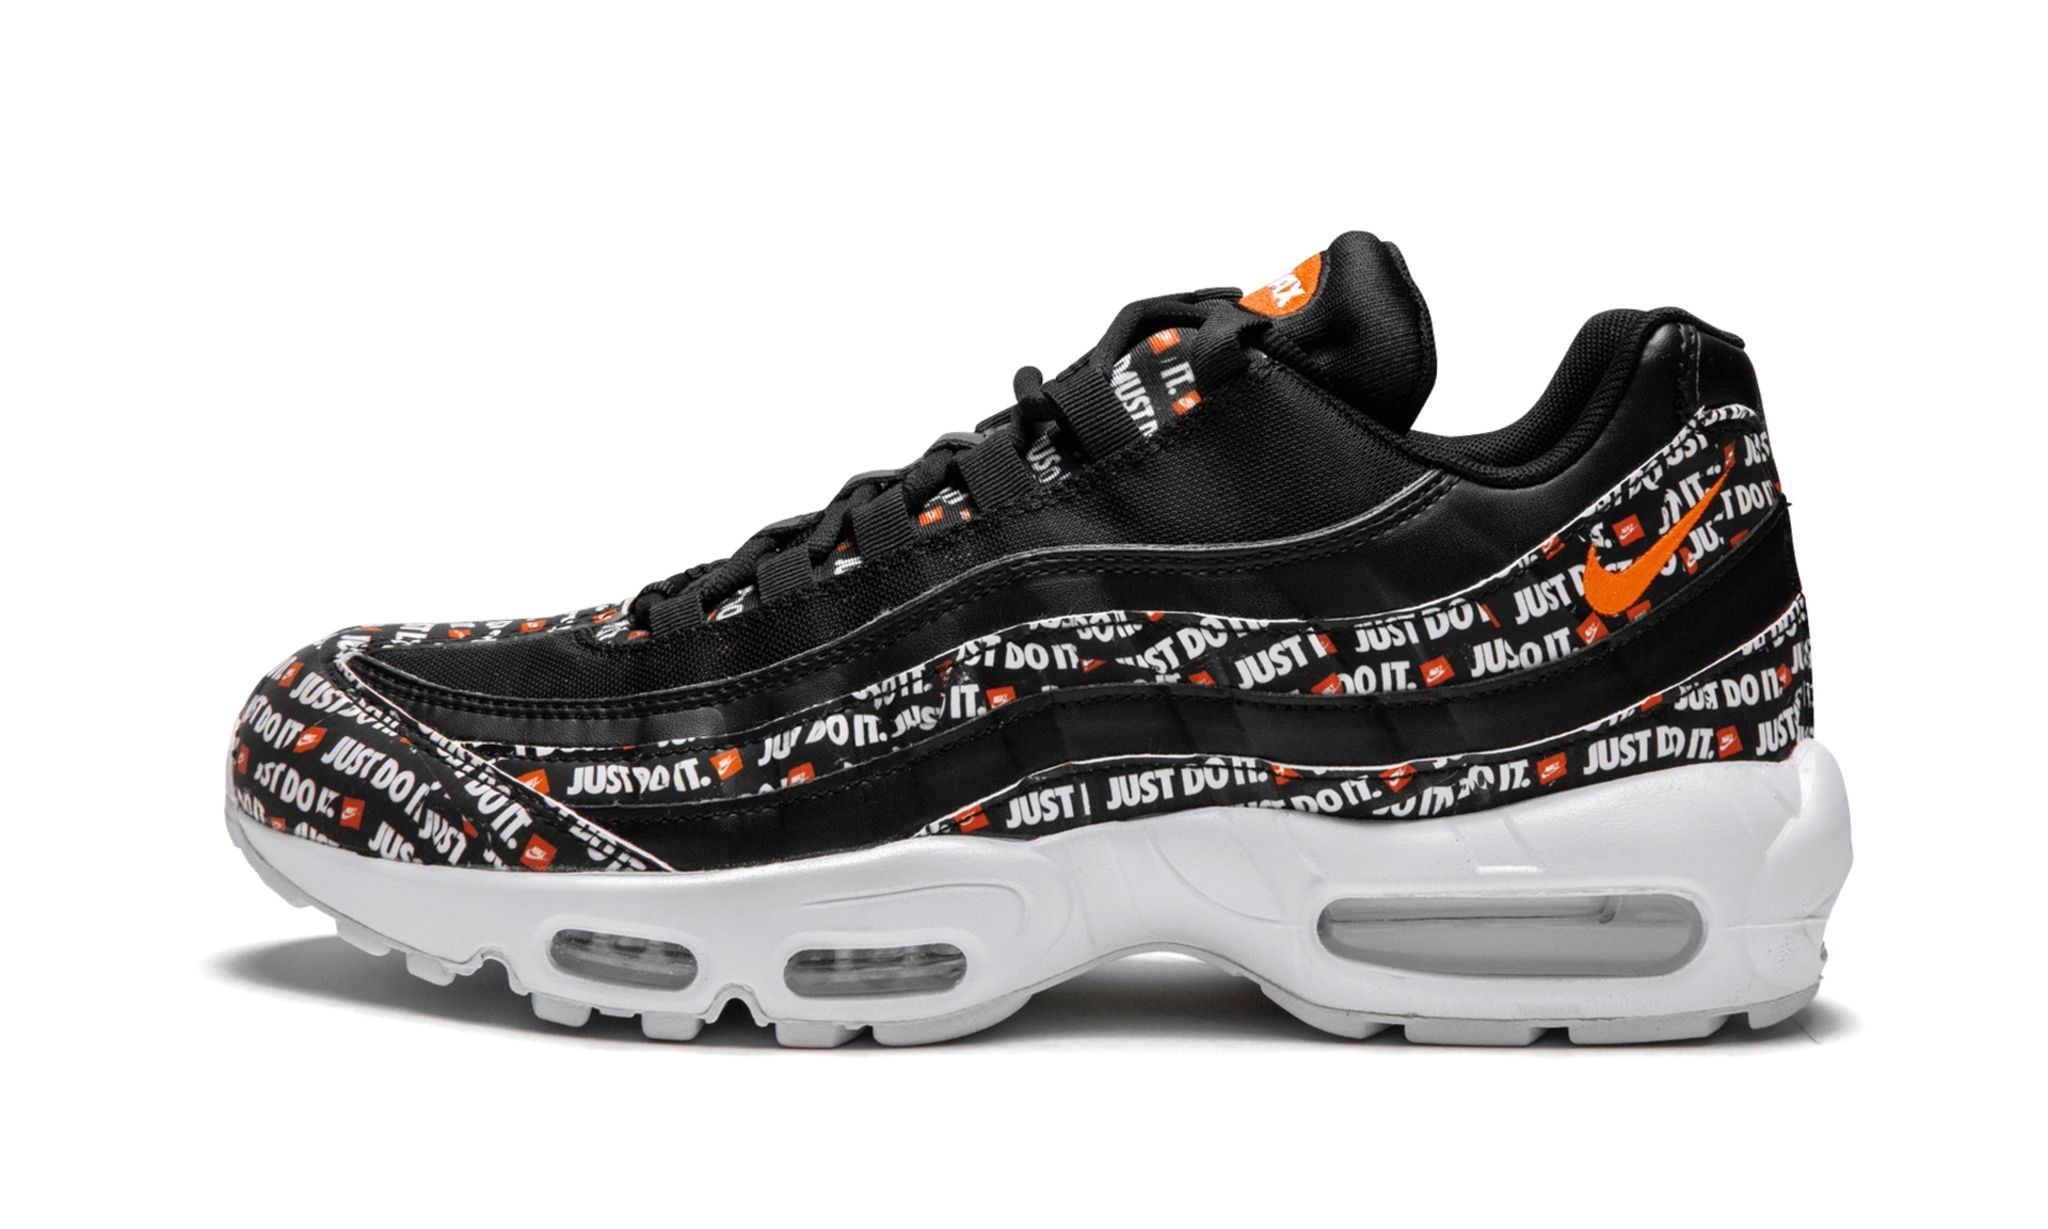 Air Max 95 SE "Just Do It Pack" - 1